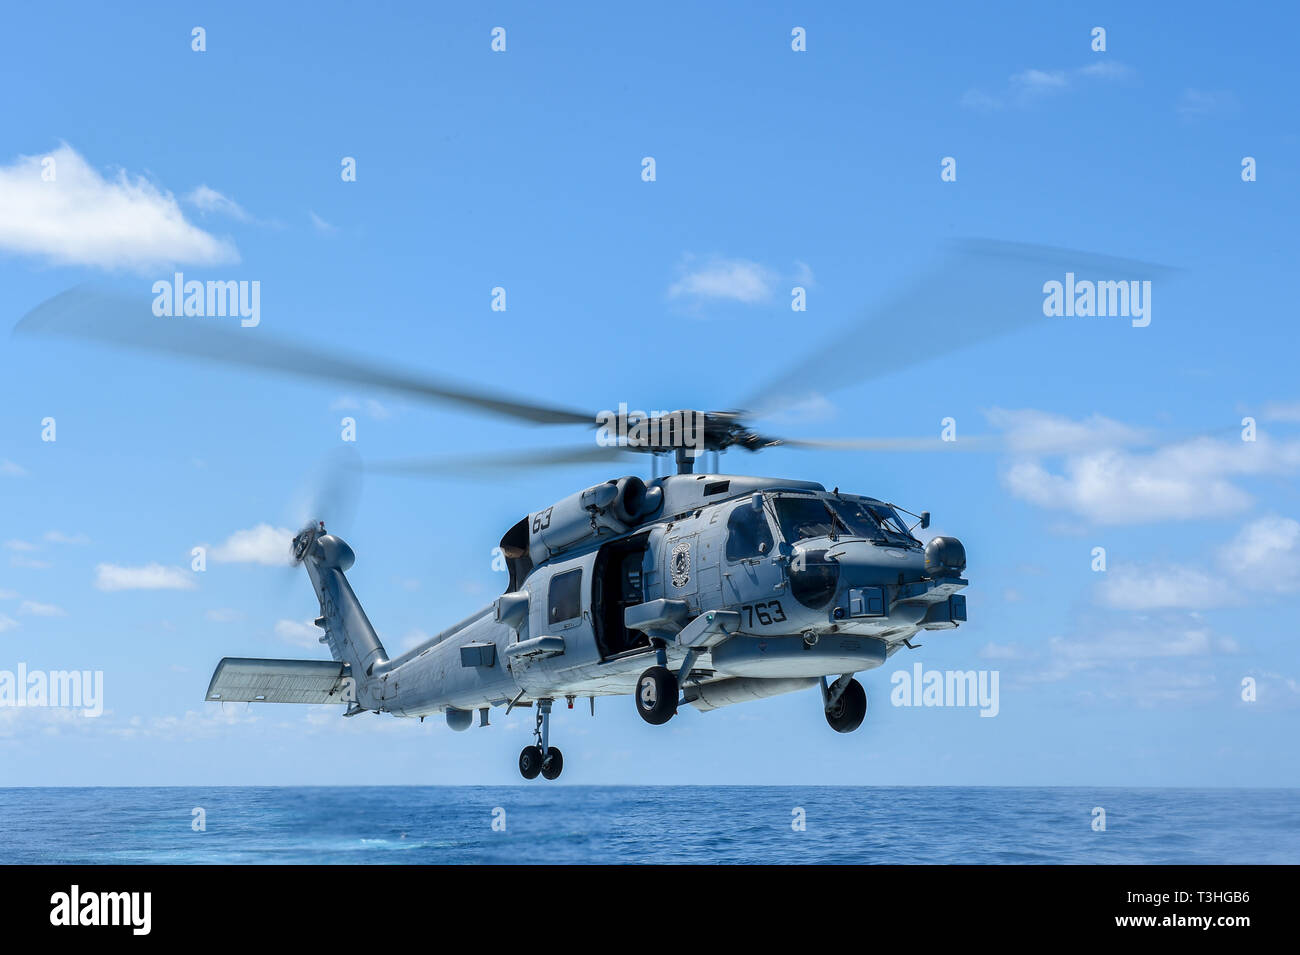 190408-N-UM706-0418 ATLANTIC OCEAN (April 8, 2019) An MH-60R Sea Hawk Helicopter assigned to the “Grandmasters” of Helicopter Maritime Strike Squadron (HSM) 46 takes off of the flight deck aboard the Arleigh Burke-class guided-missile destroyer USS Nitze (DDG 94). Nitze is underway as part of Abraham Lincoln Carrier Strike Group (ABECSG) deployment in support of maritime security cooperation efforts in the U.S. 5th, 6th and 7th Fleet areas of responsibility. With Abraham Lincoln as the flagship, deployed strike group assets include staffs, ships and aircraft of Carrier Strike Group 12 (CSG 12) Stock Photo